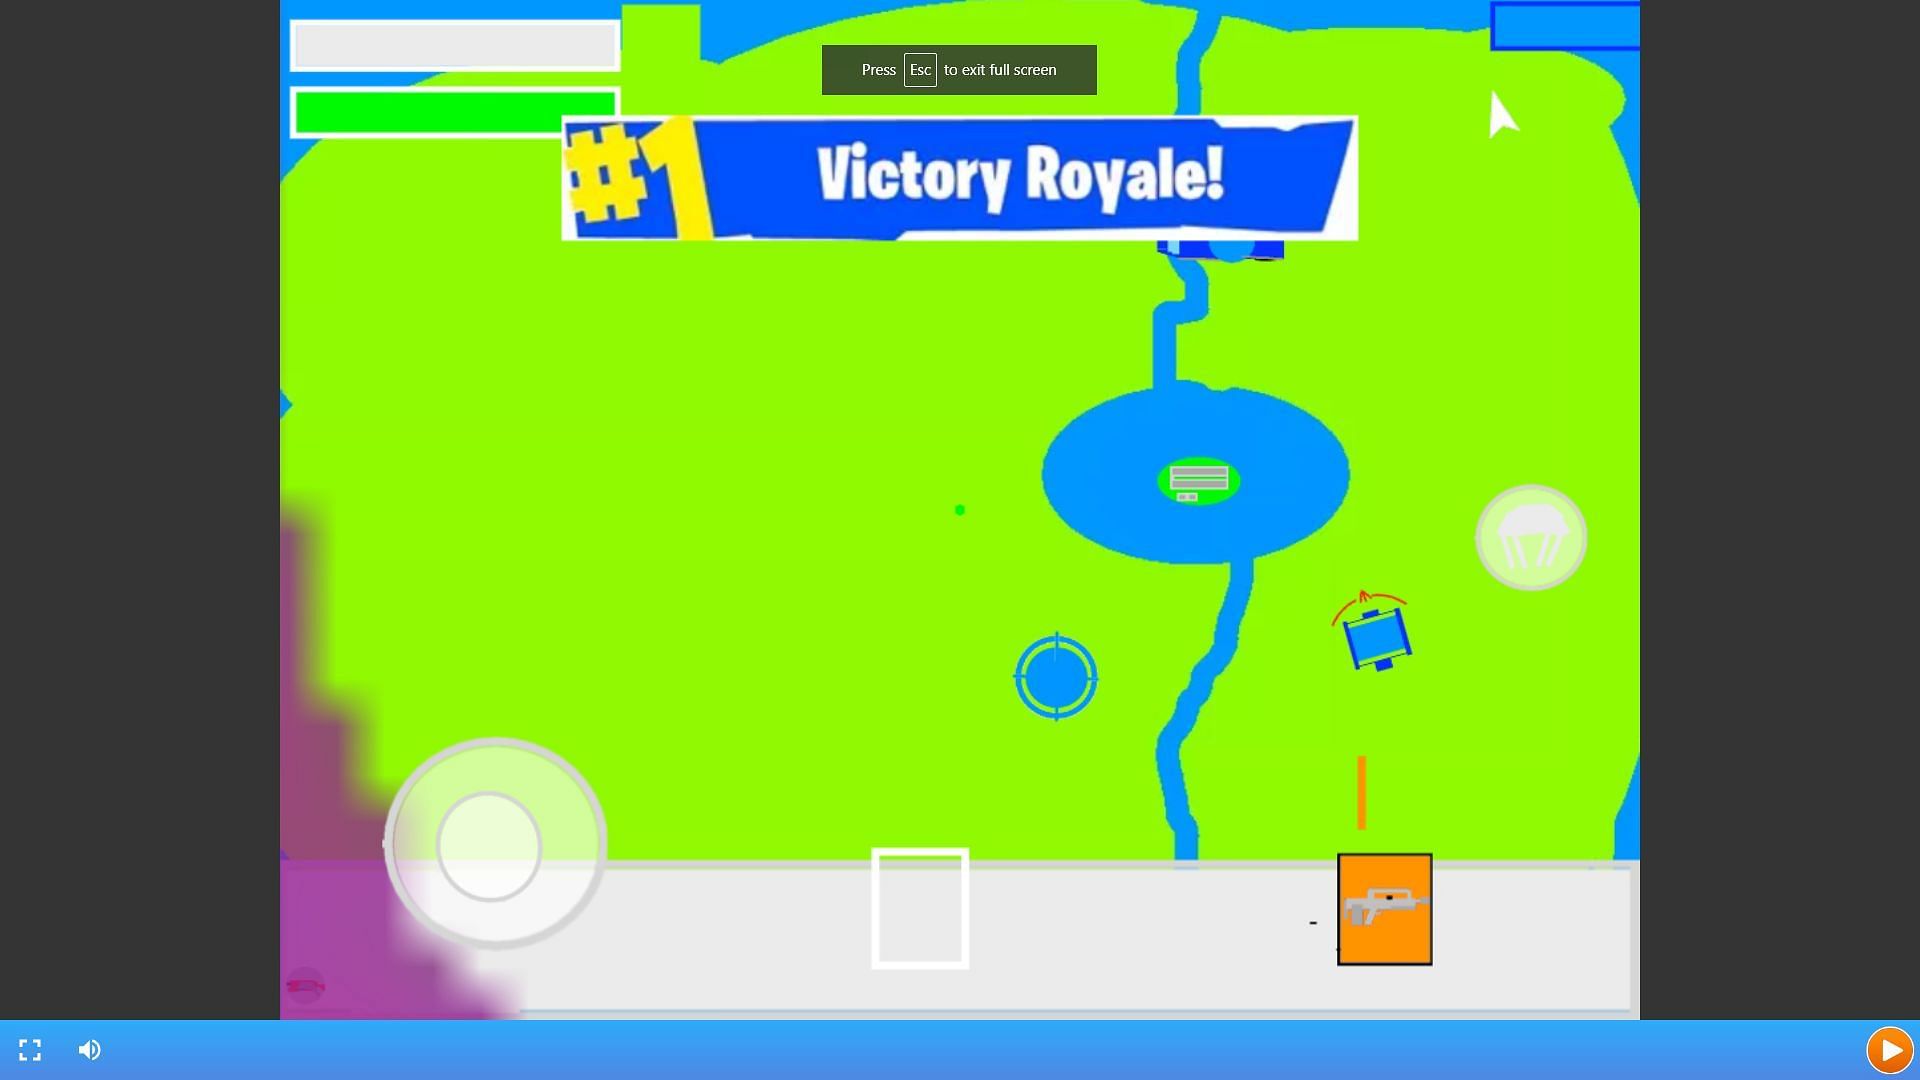 Congratulations on securing a Victory Royale (Image via tynker)